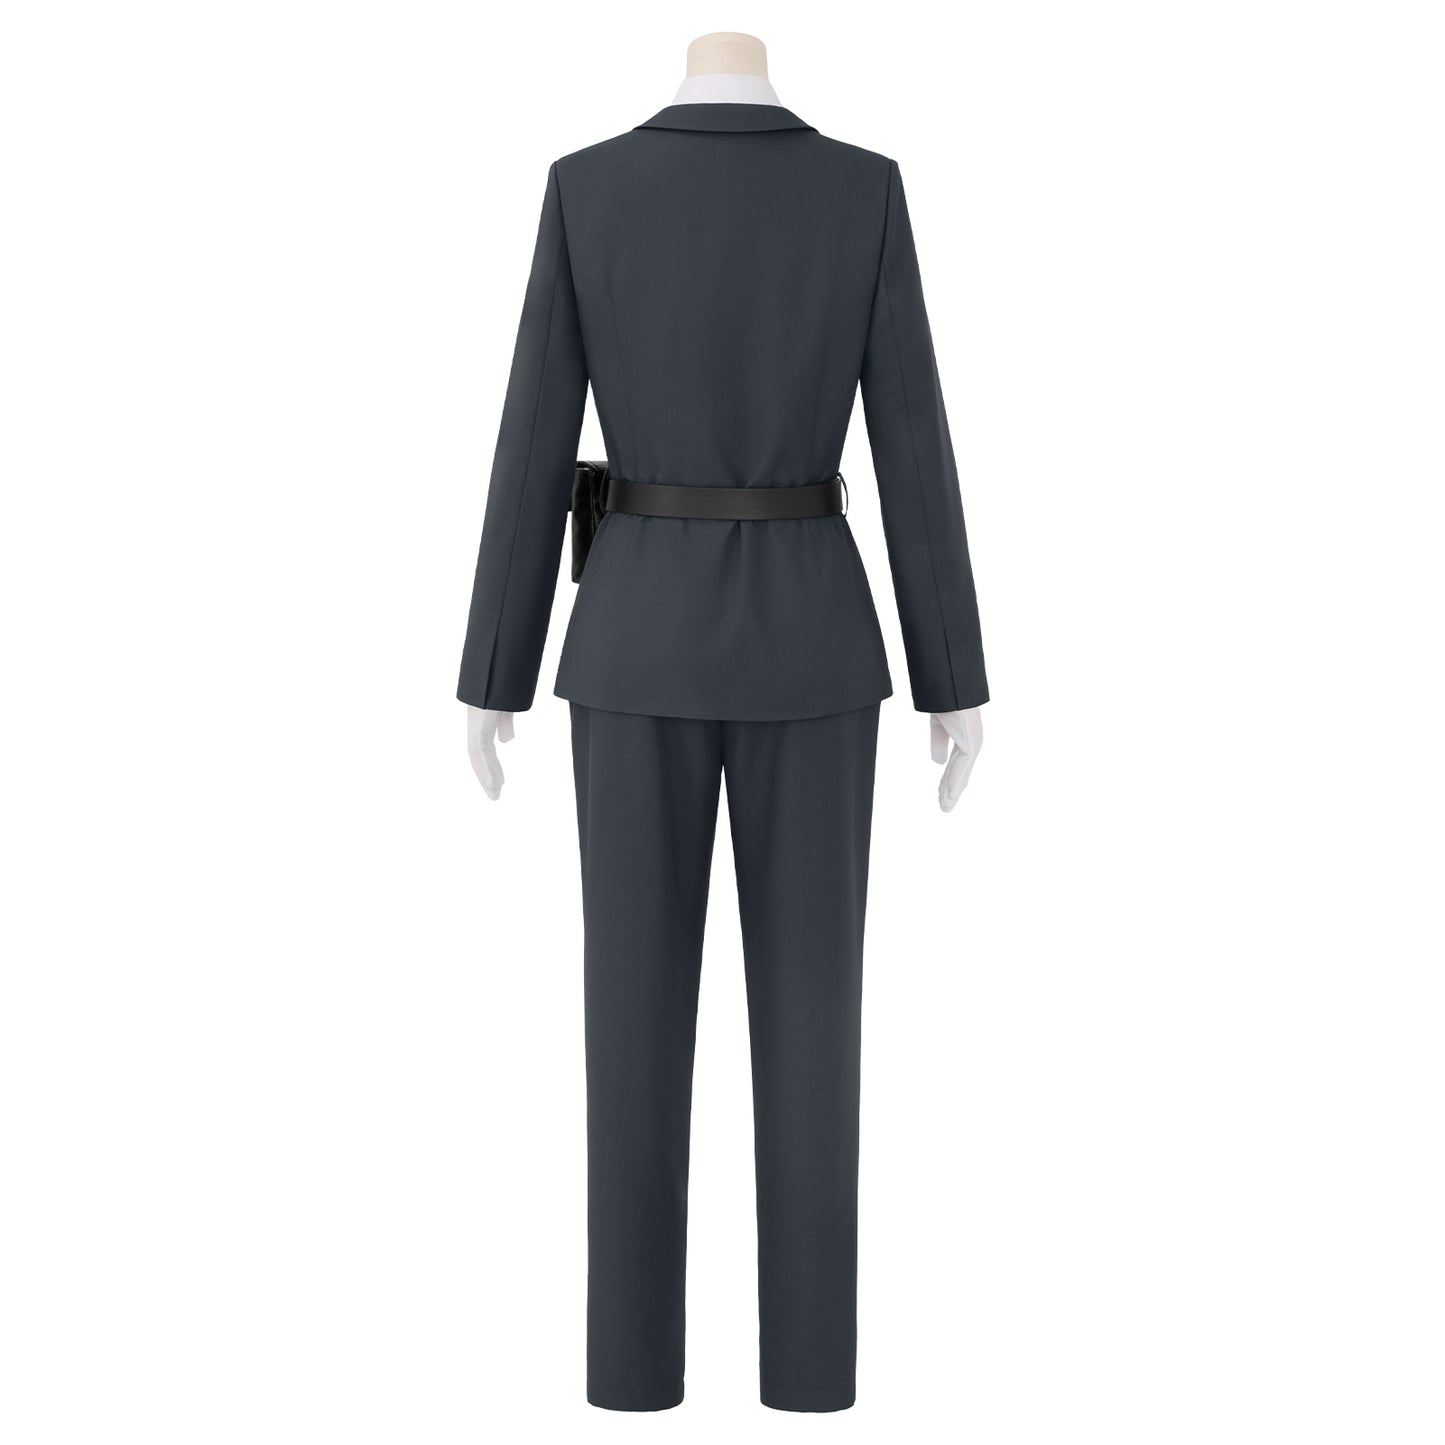 BLUE LOCK Rin Itoshi Cosplay Costume Police Guard Costume Uniform Suit Full Sets